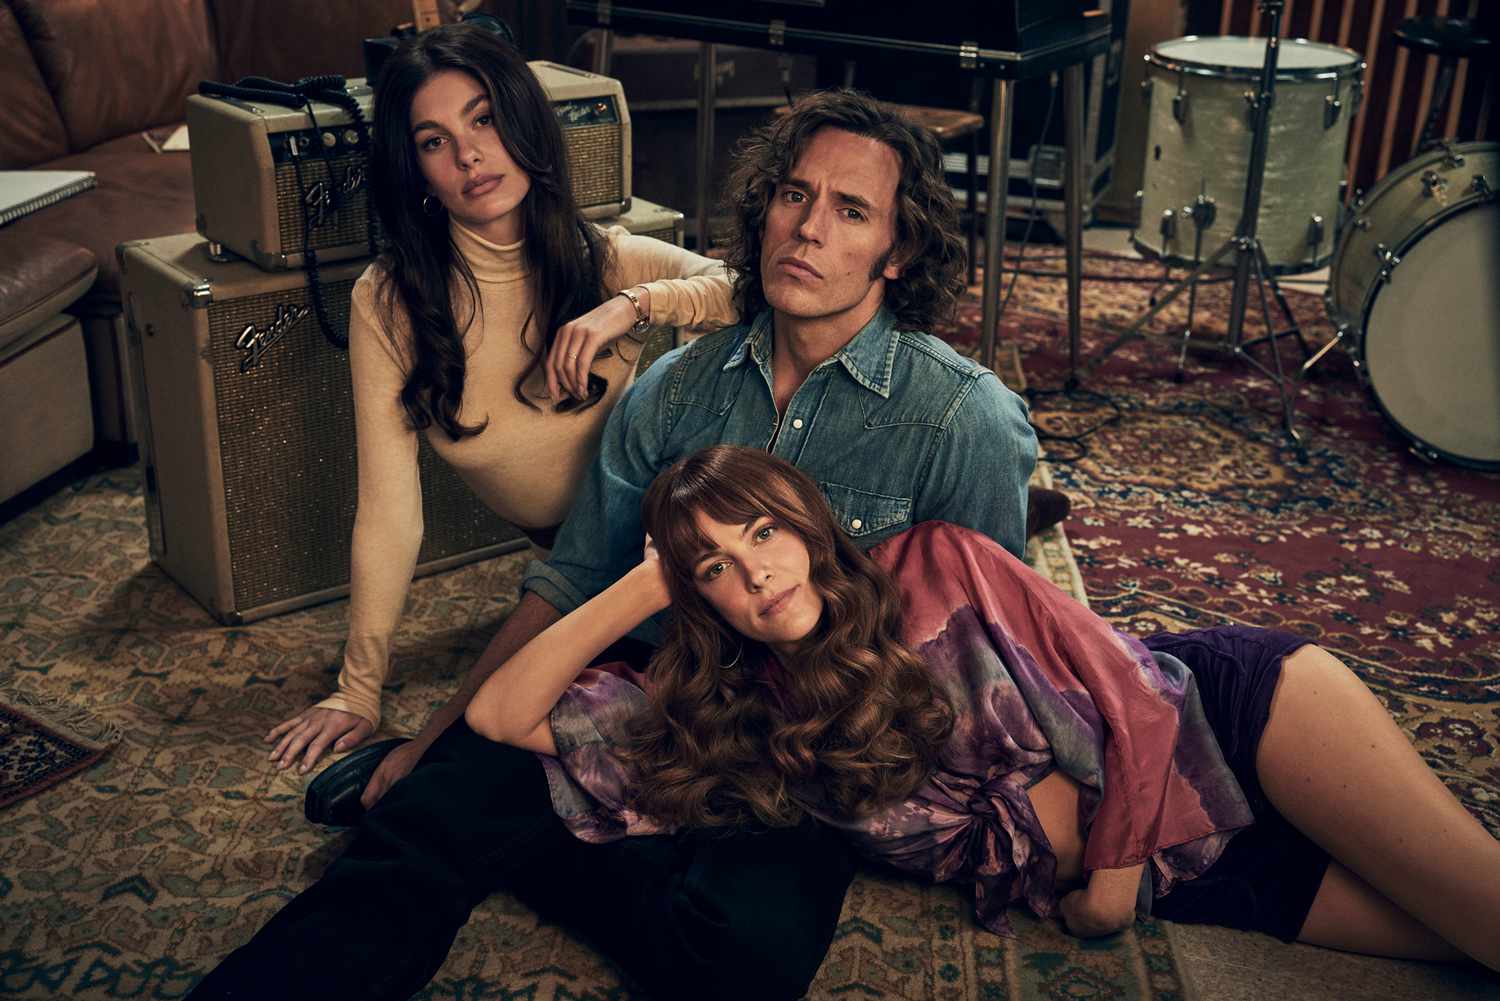 Teaser Watch: Riley Keough Fronts an Iconic Rock Band in “Daisy Jones & the Six”